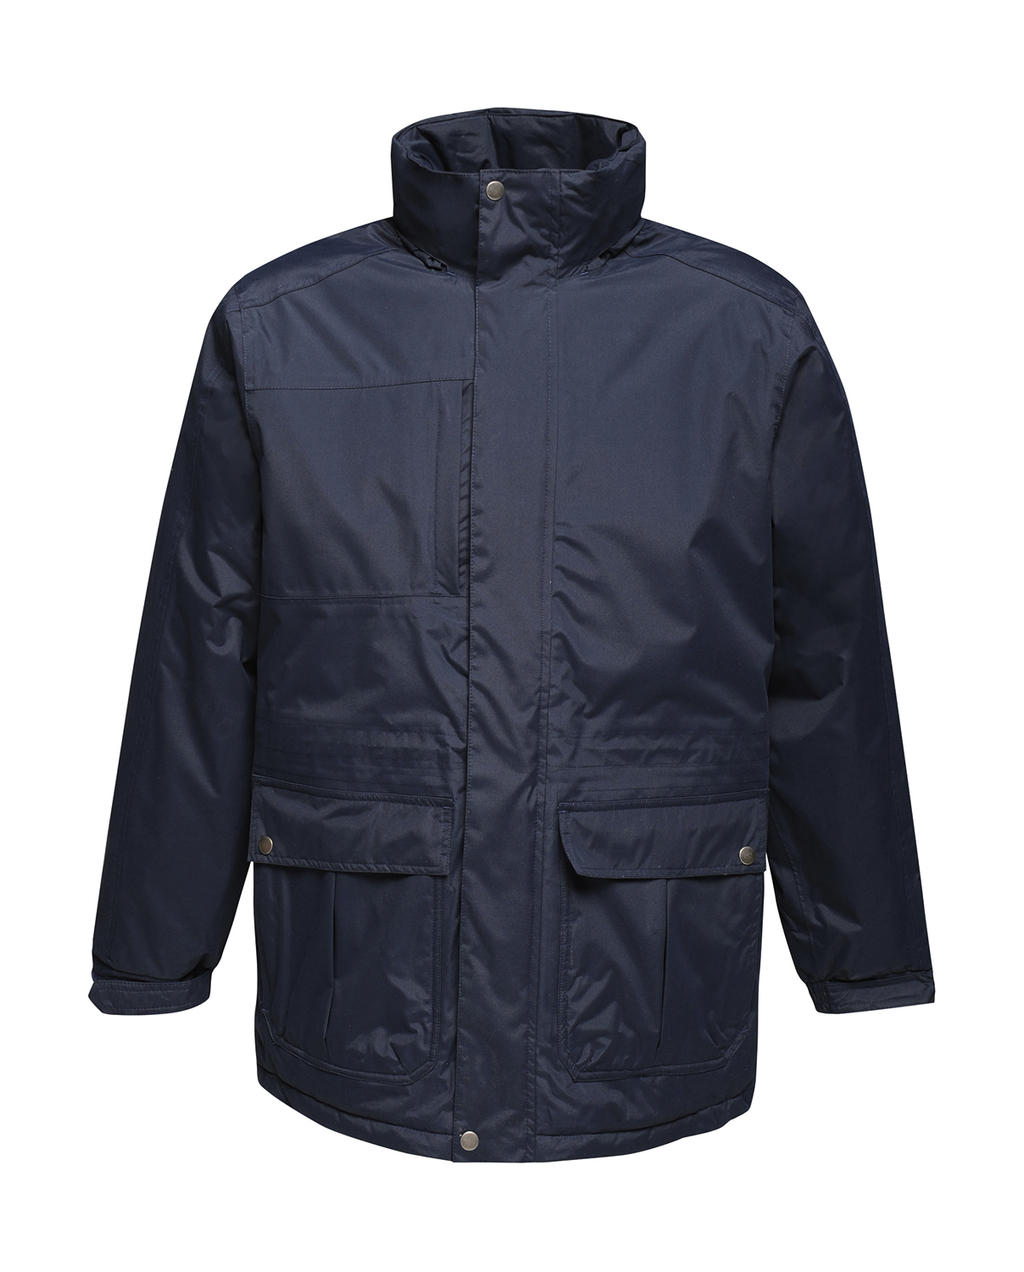  Darby III Jacket in Farbe Navy